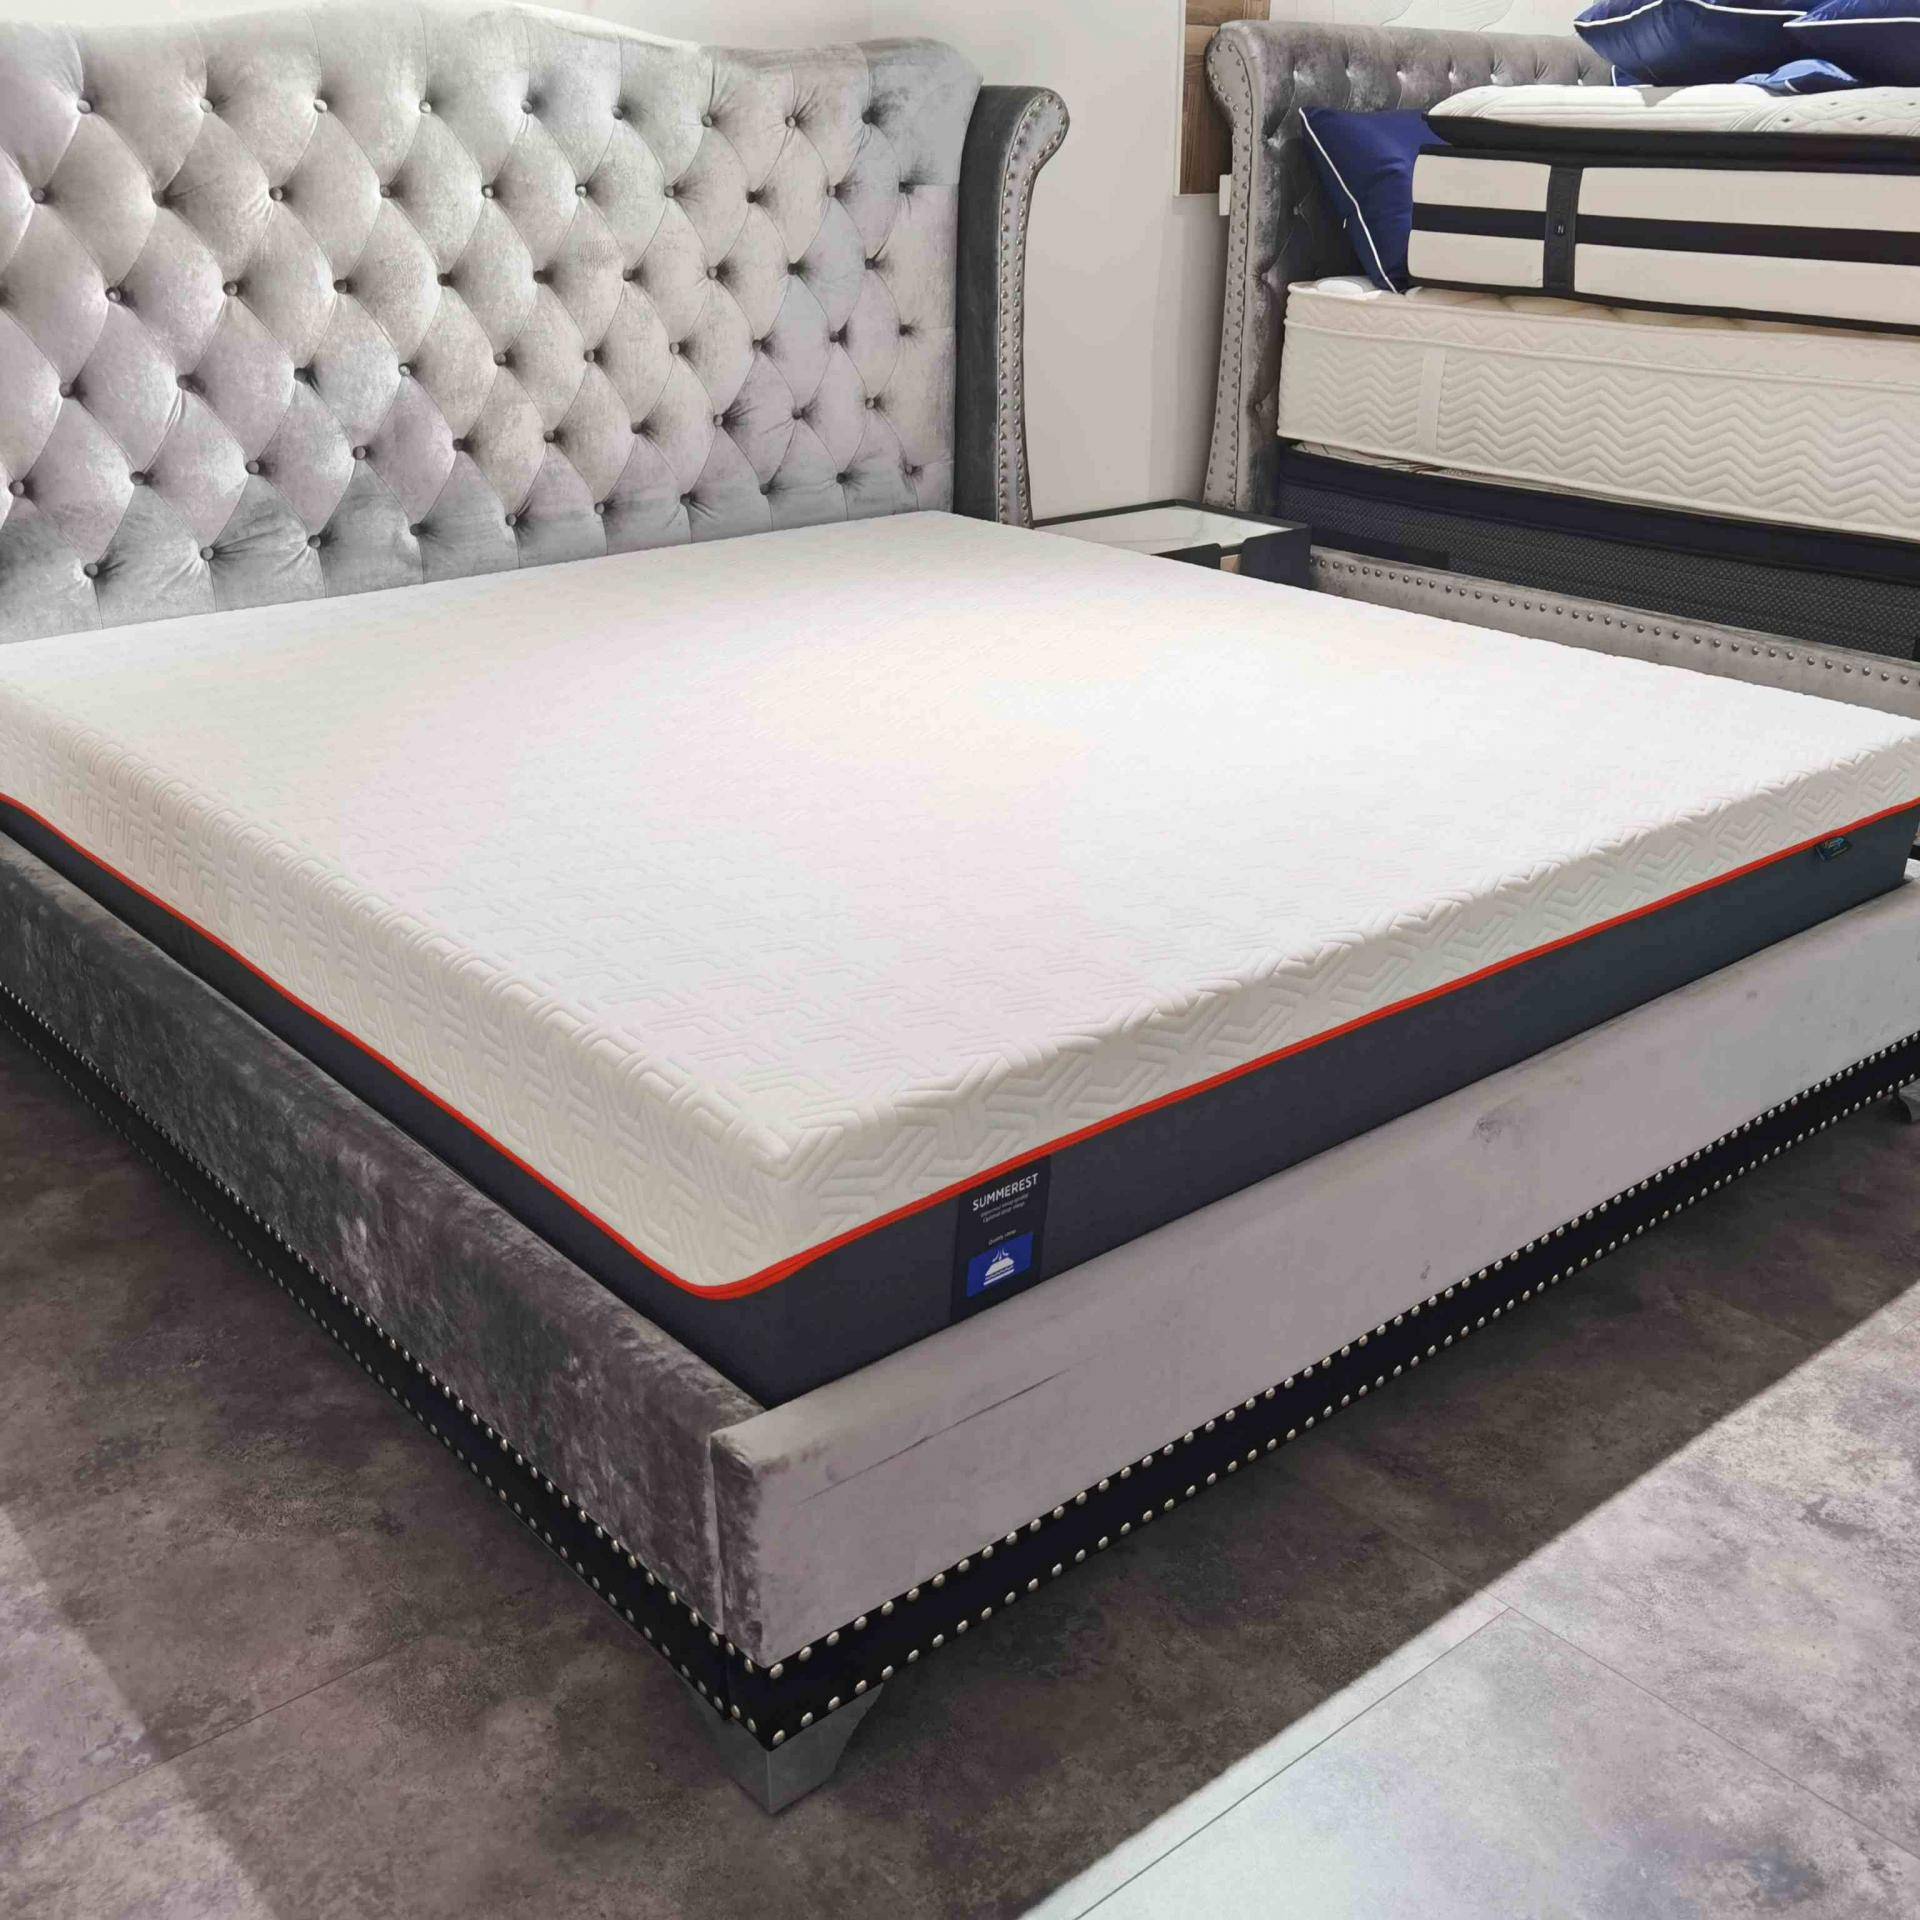 A Comprehensive Guide to Soft Memory Foam and Charcoal Bamboo Foam Mattresses